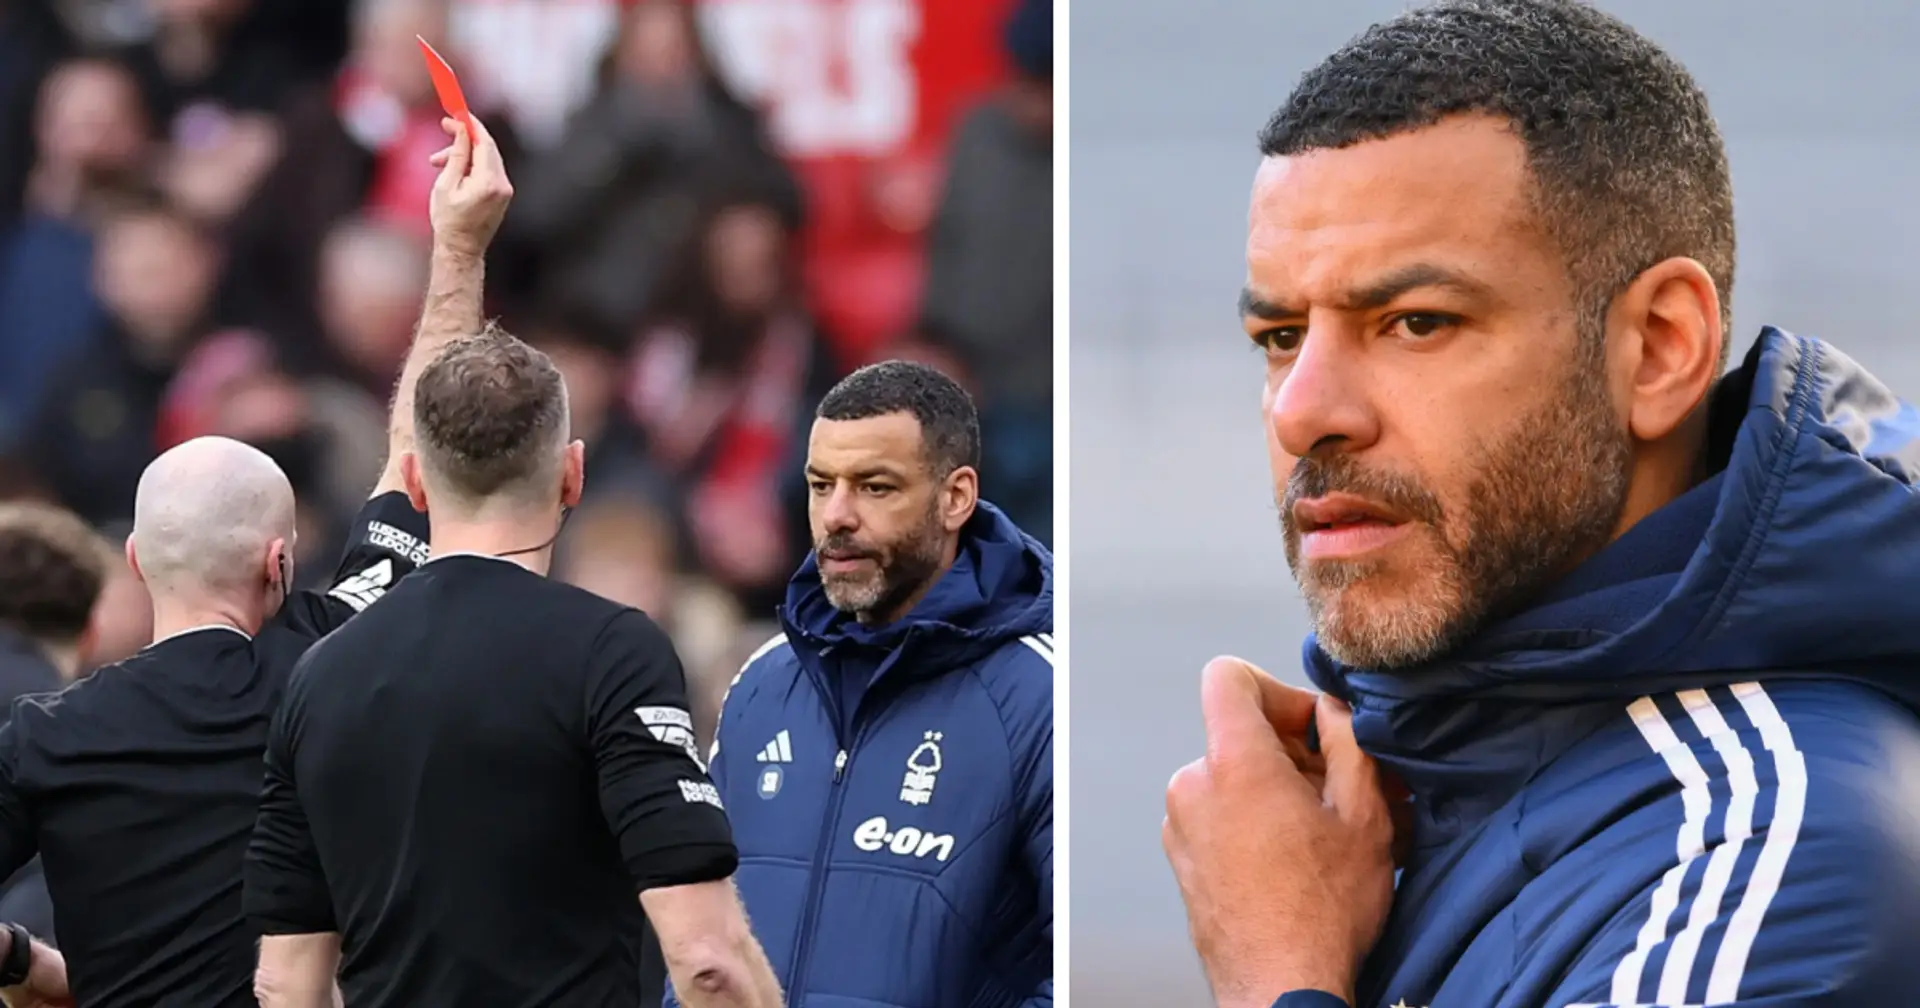 'It’s the same every week, you c**t': Paul Tierney reveals what Forest’s Steven Reid said to him after Liverpool defeat